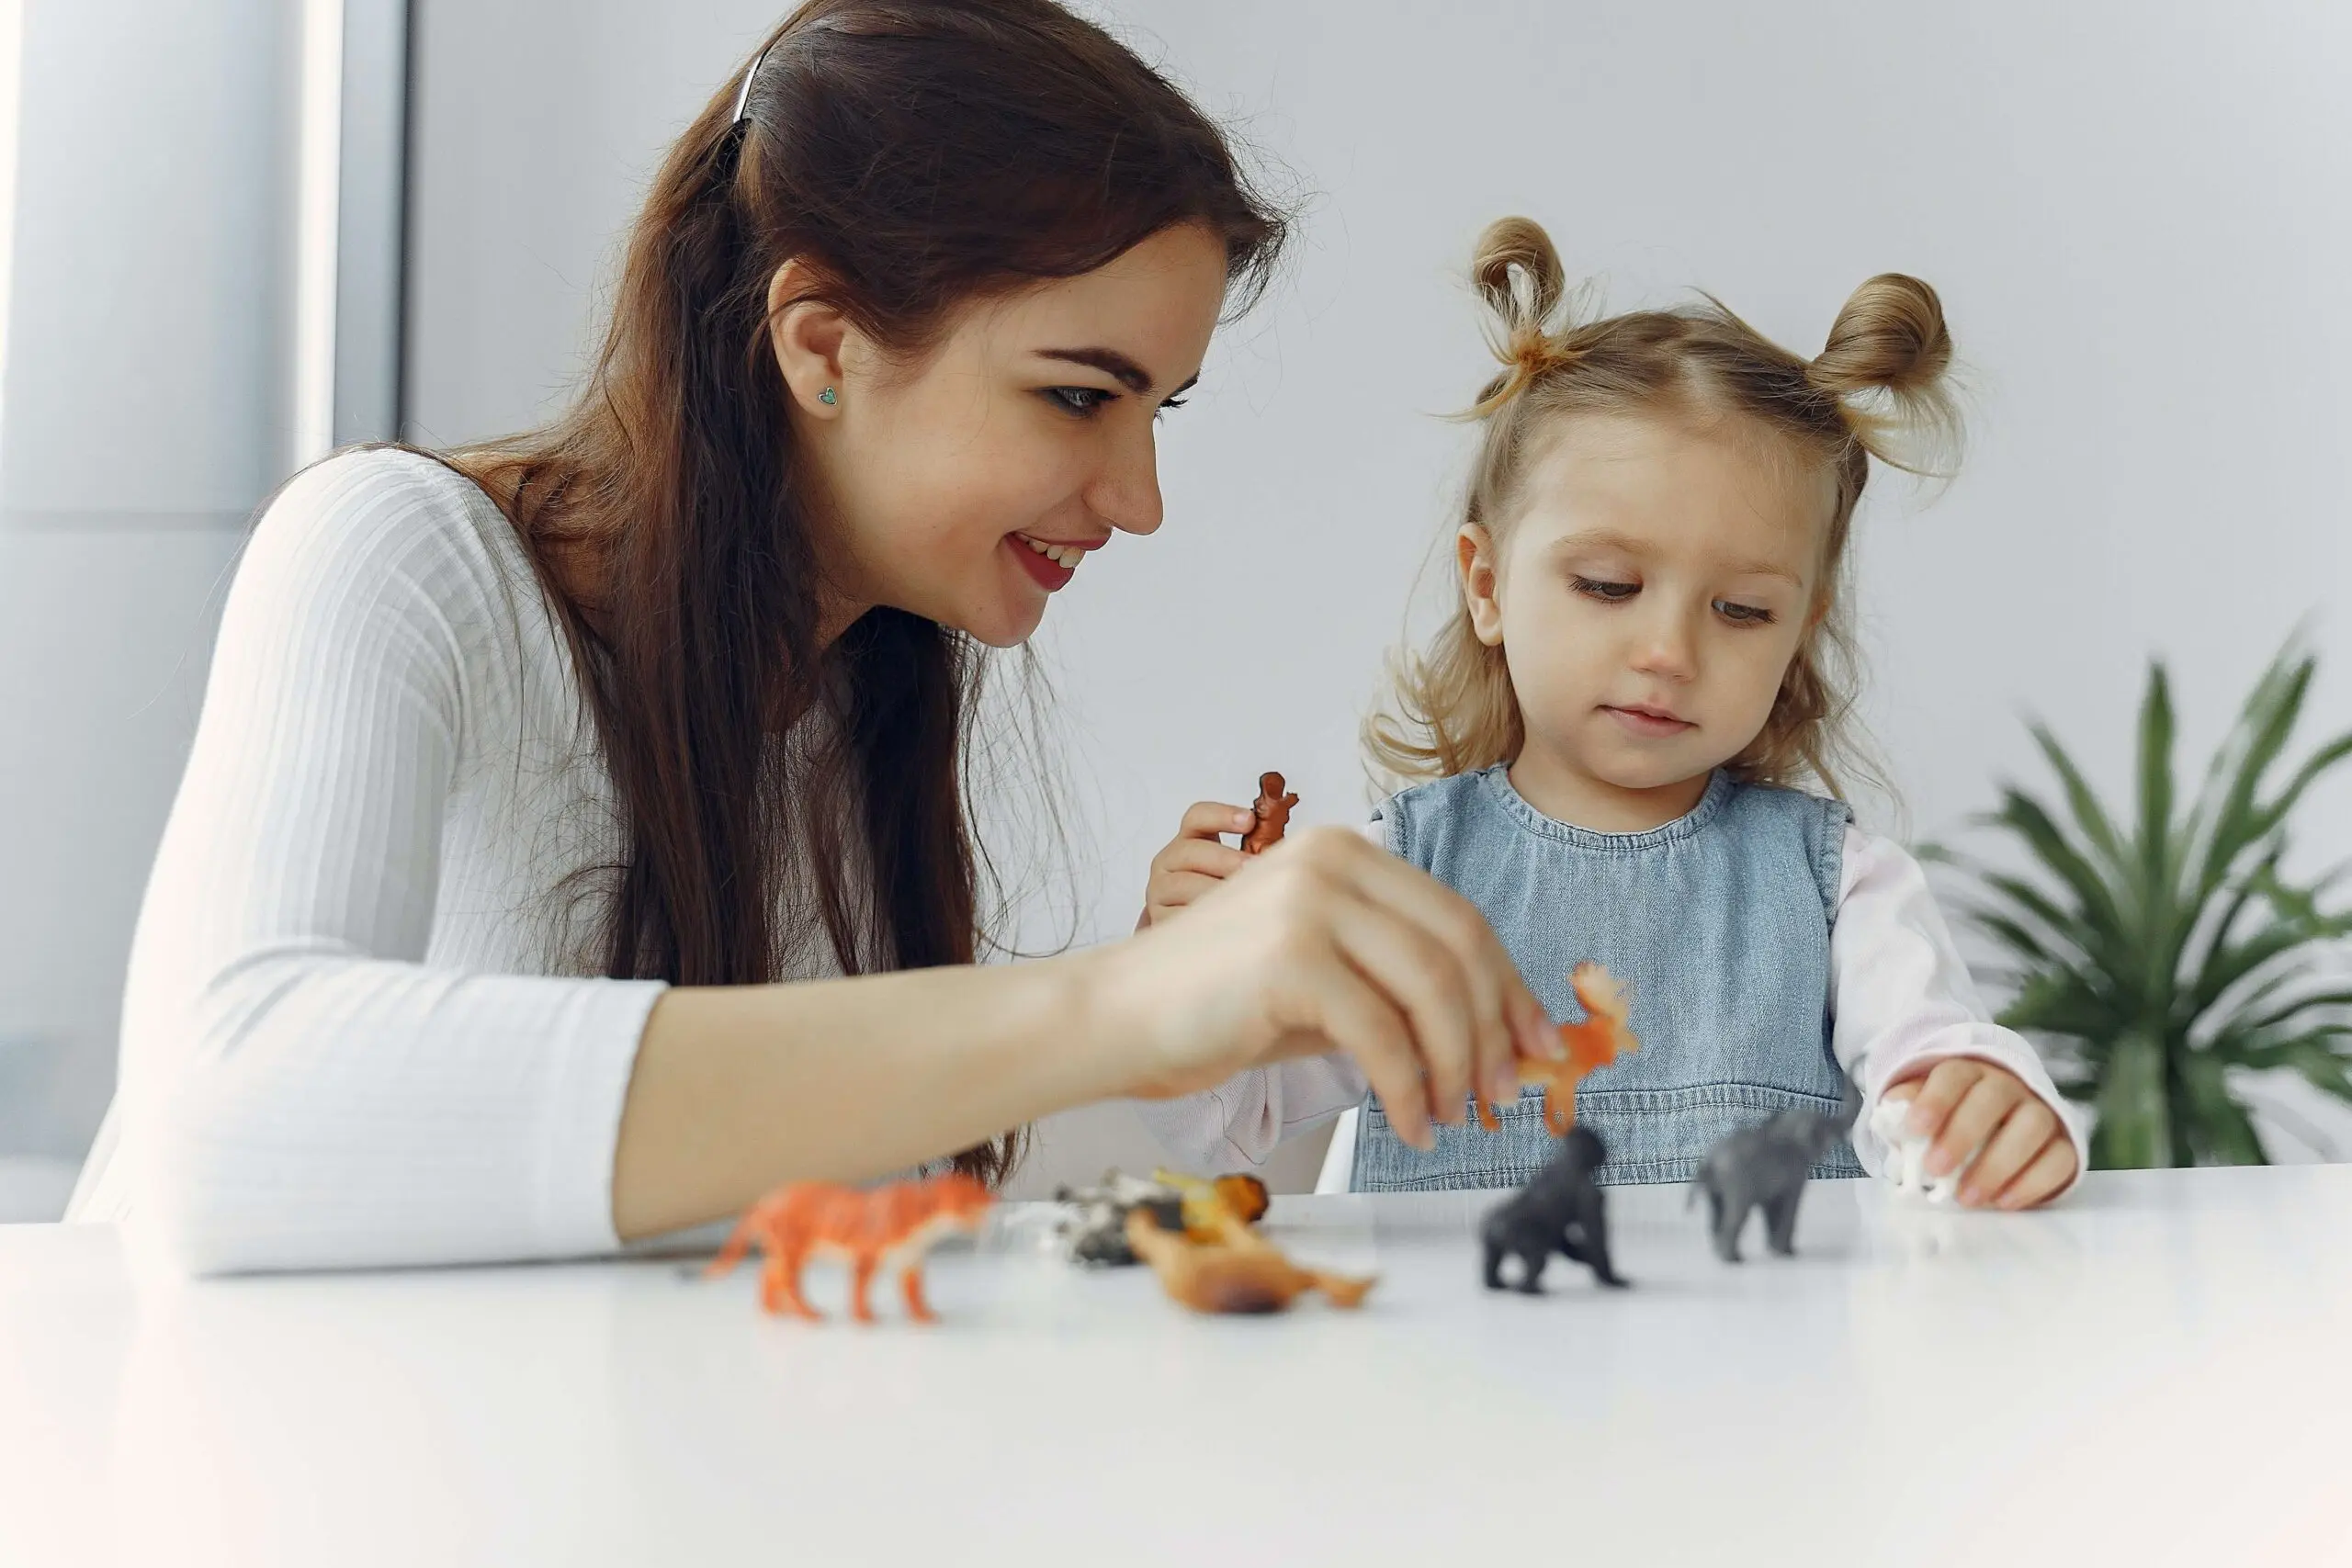 A woman and small female child in a denim jumper play with animal figurines at a table